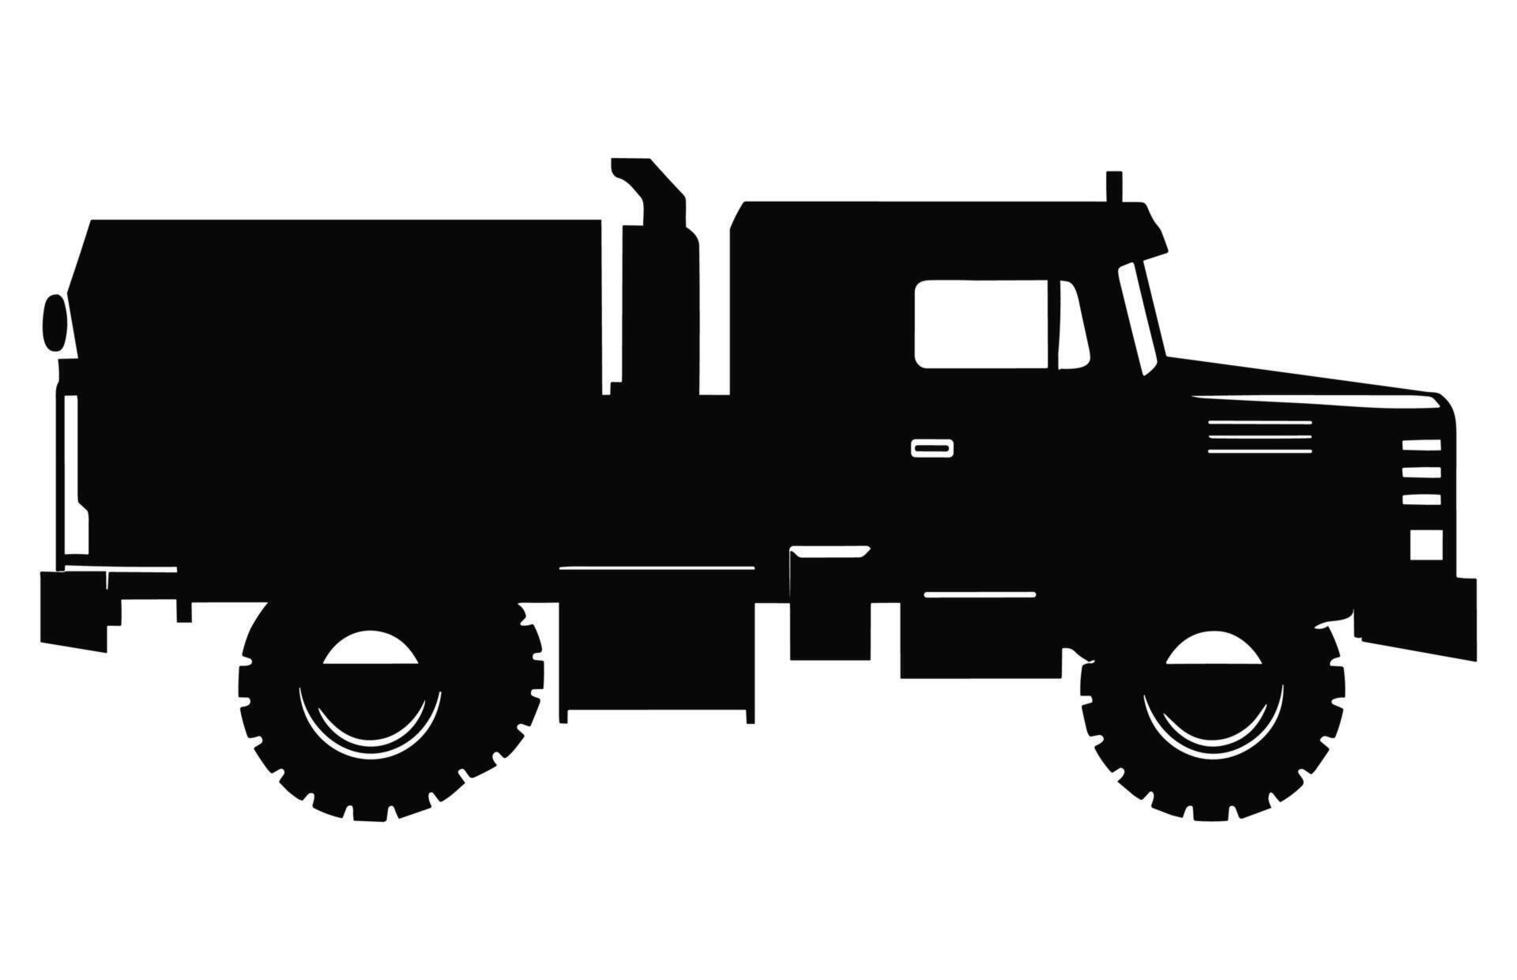 A Military truck silhouette isolated on a white background, Army force Car black Vector